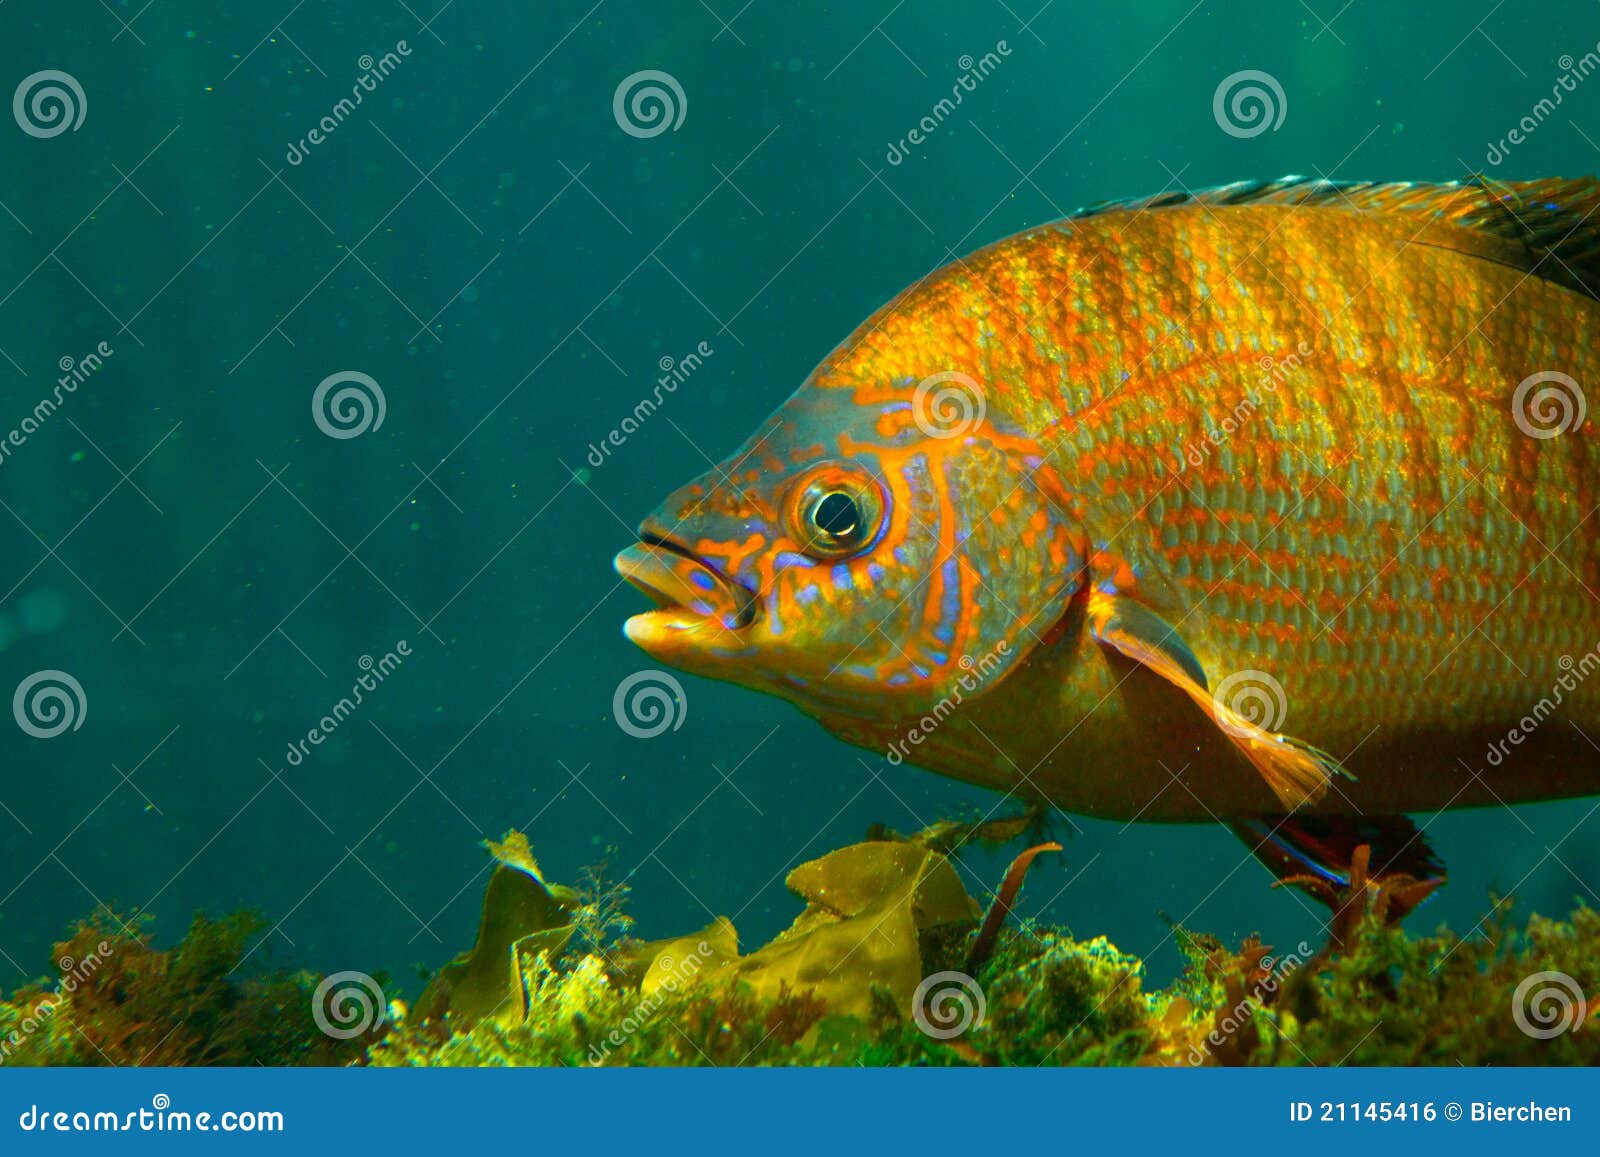 Colorful fish underwater stock photo. Image of profile - 21145416